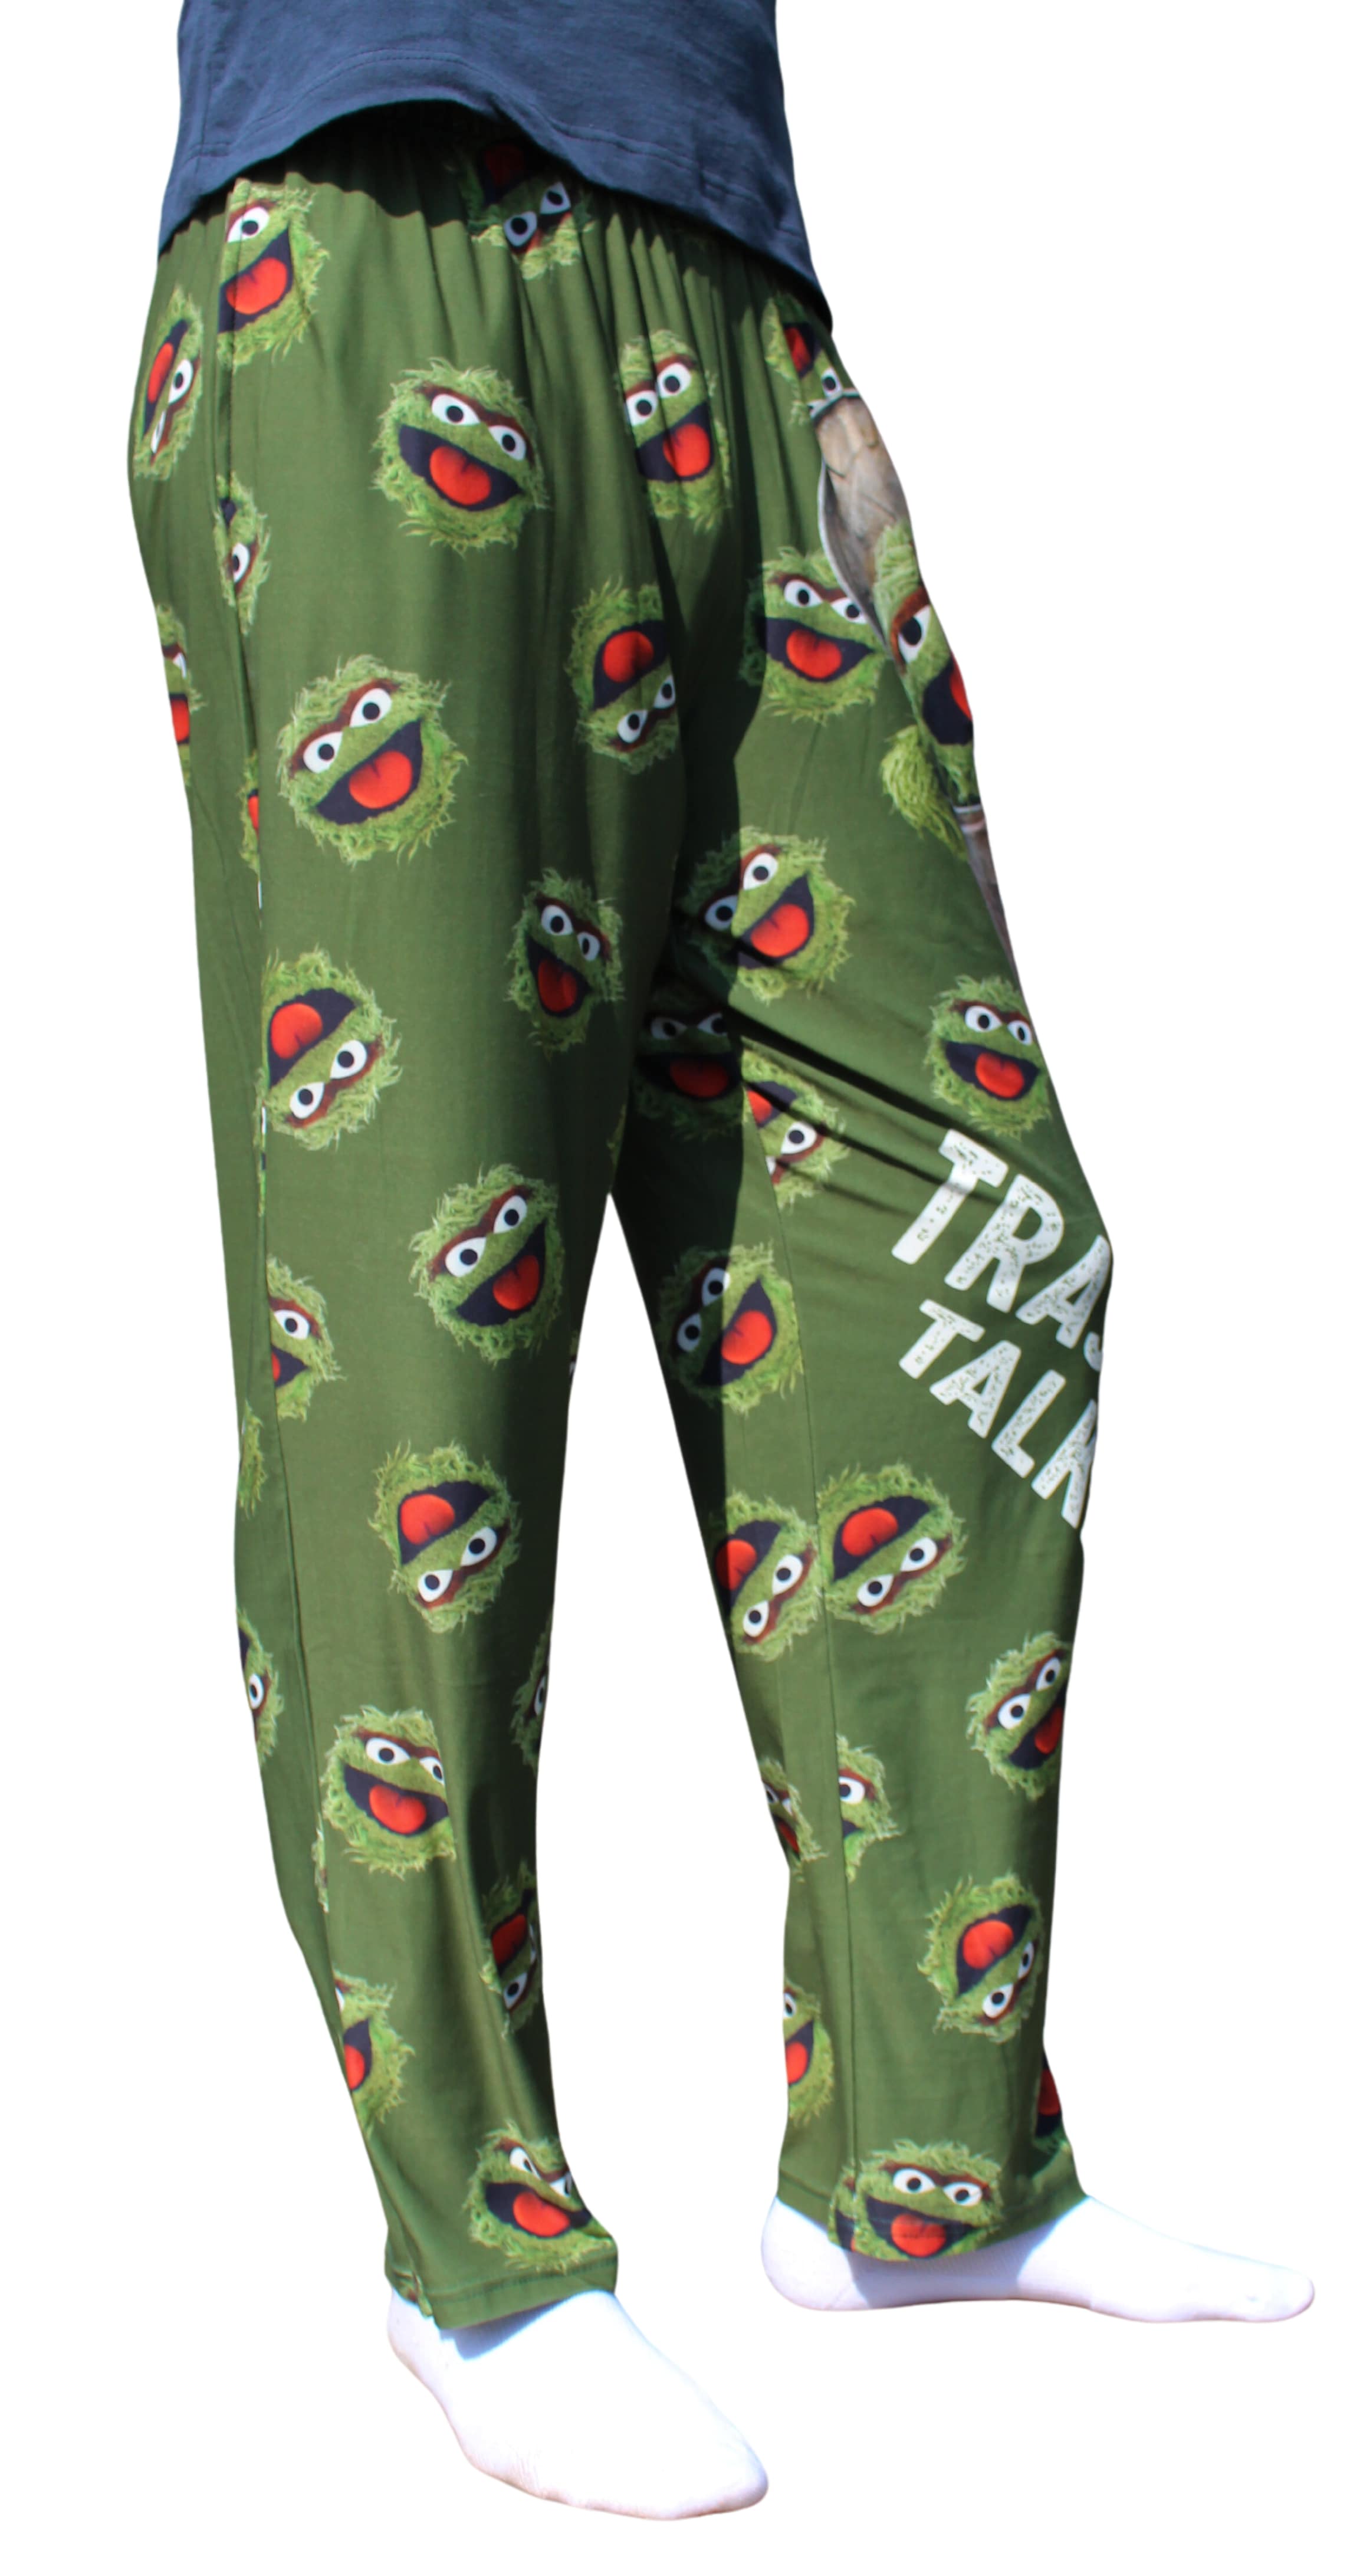 Trash Talker Pajama Lounge Pants on model right side view (waist down)